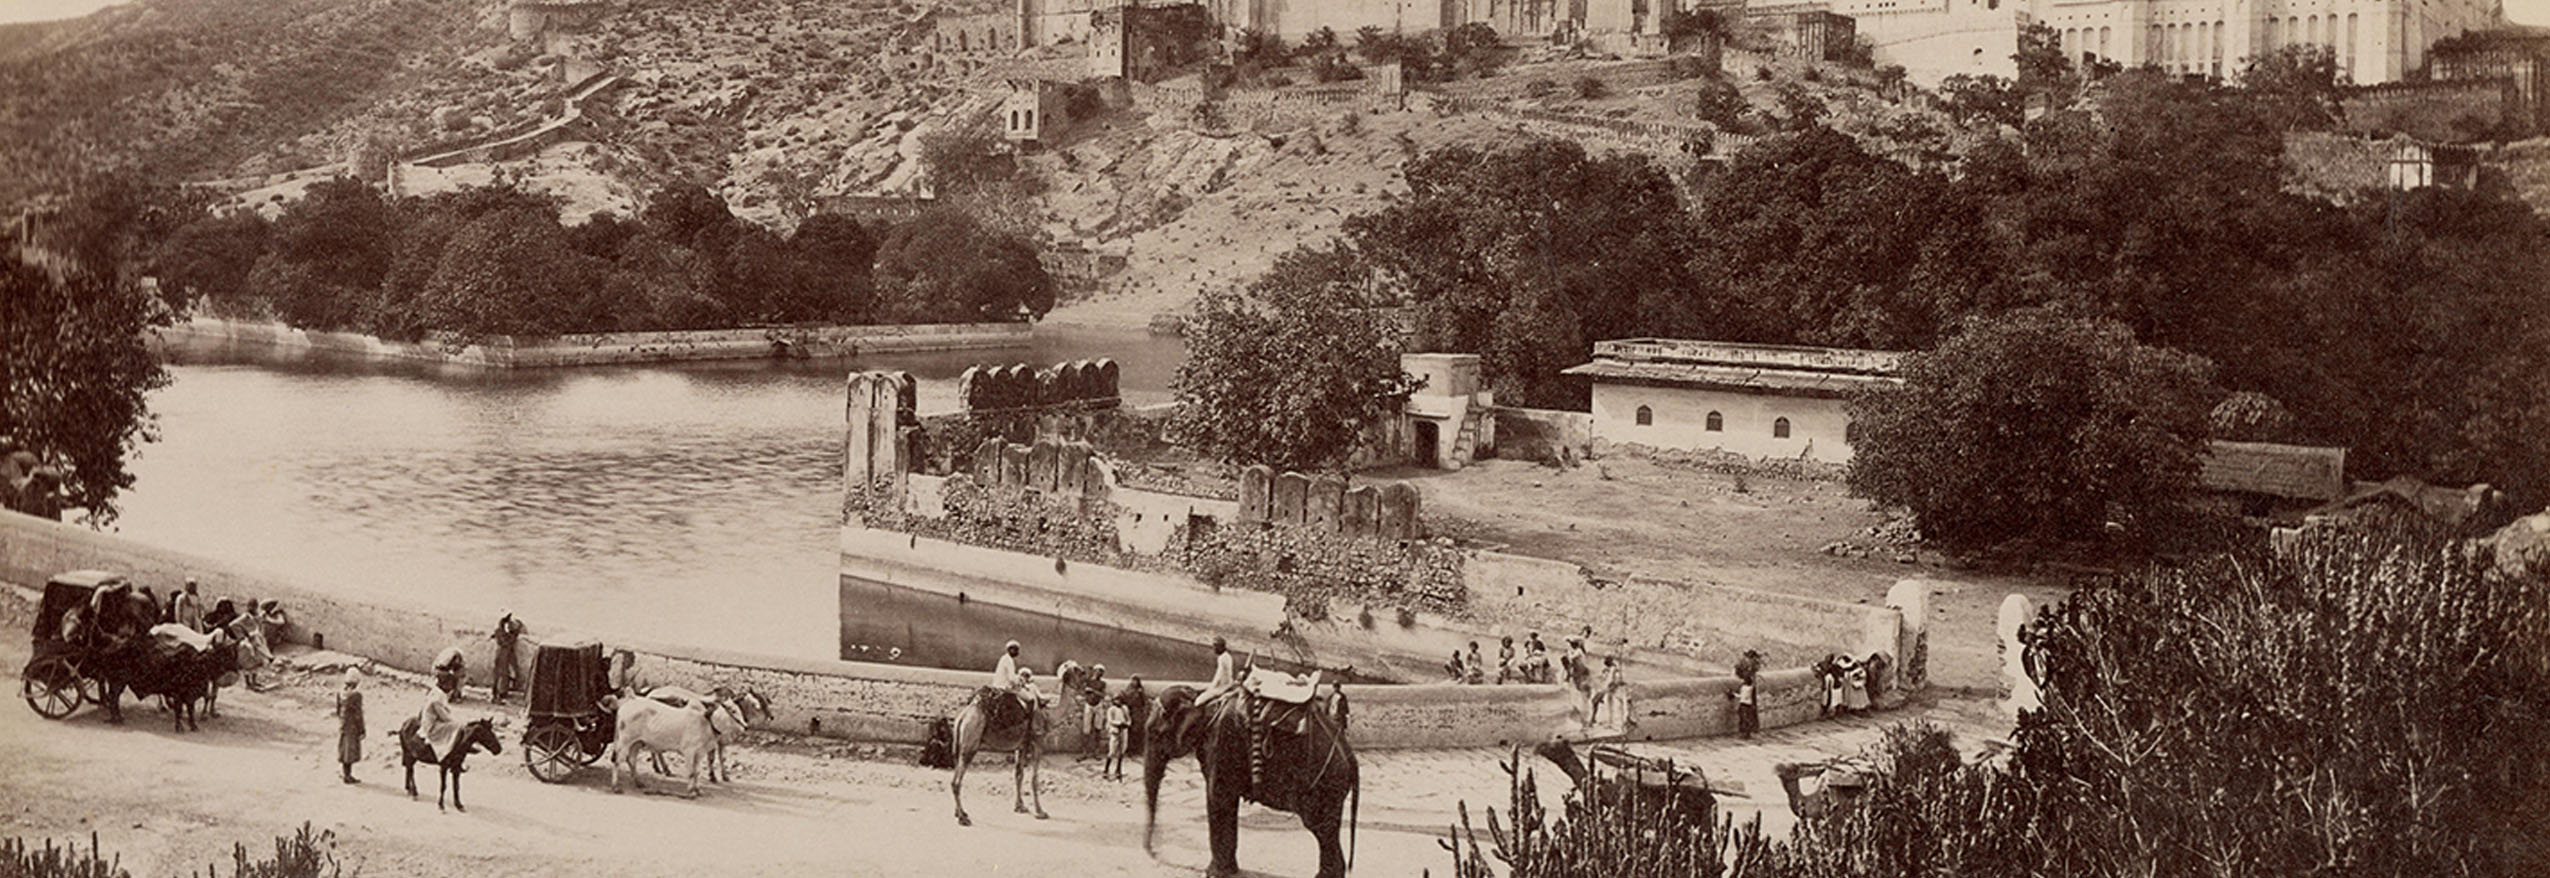 A black and white photograph of the Amber Fort, Jaipur, depicting bullock carts, camels and an elephant near a waterbody.